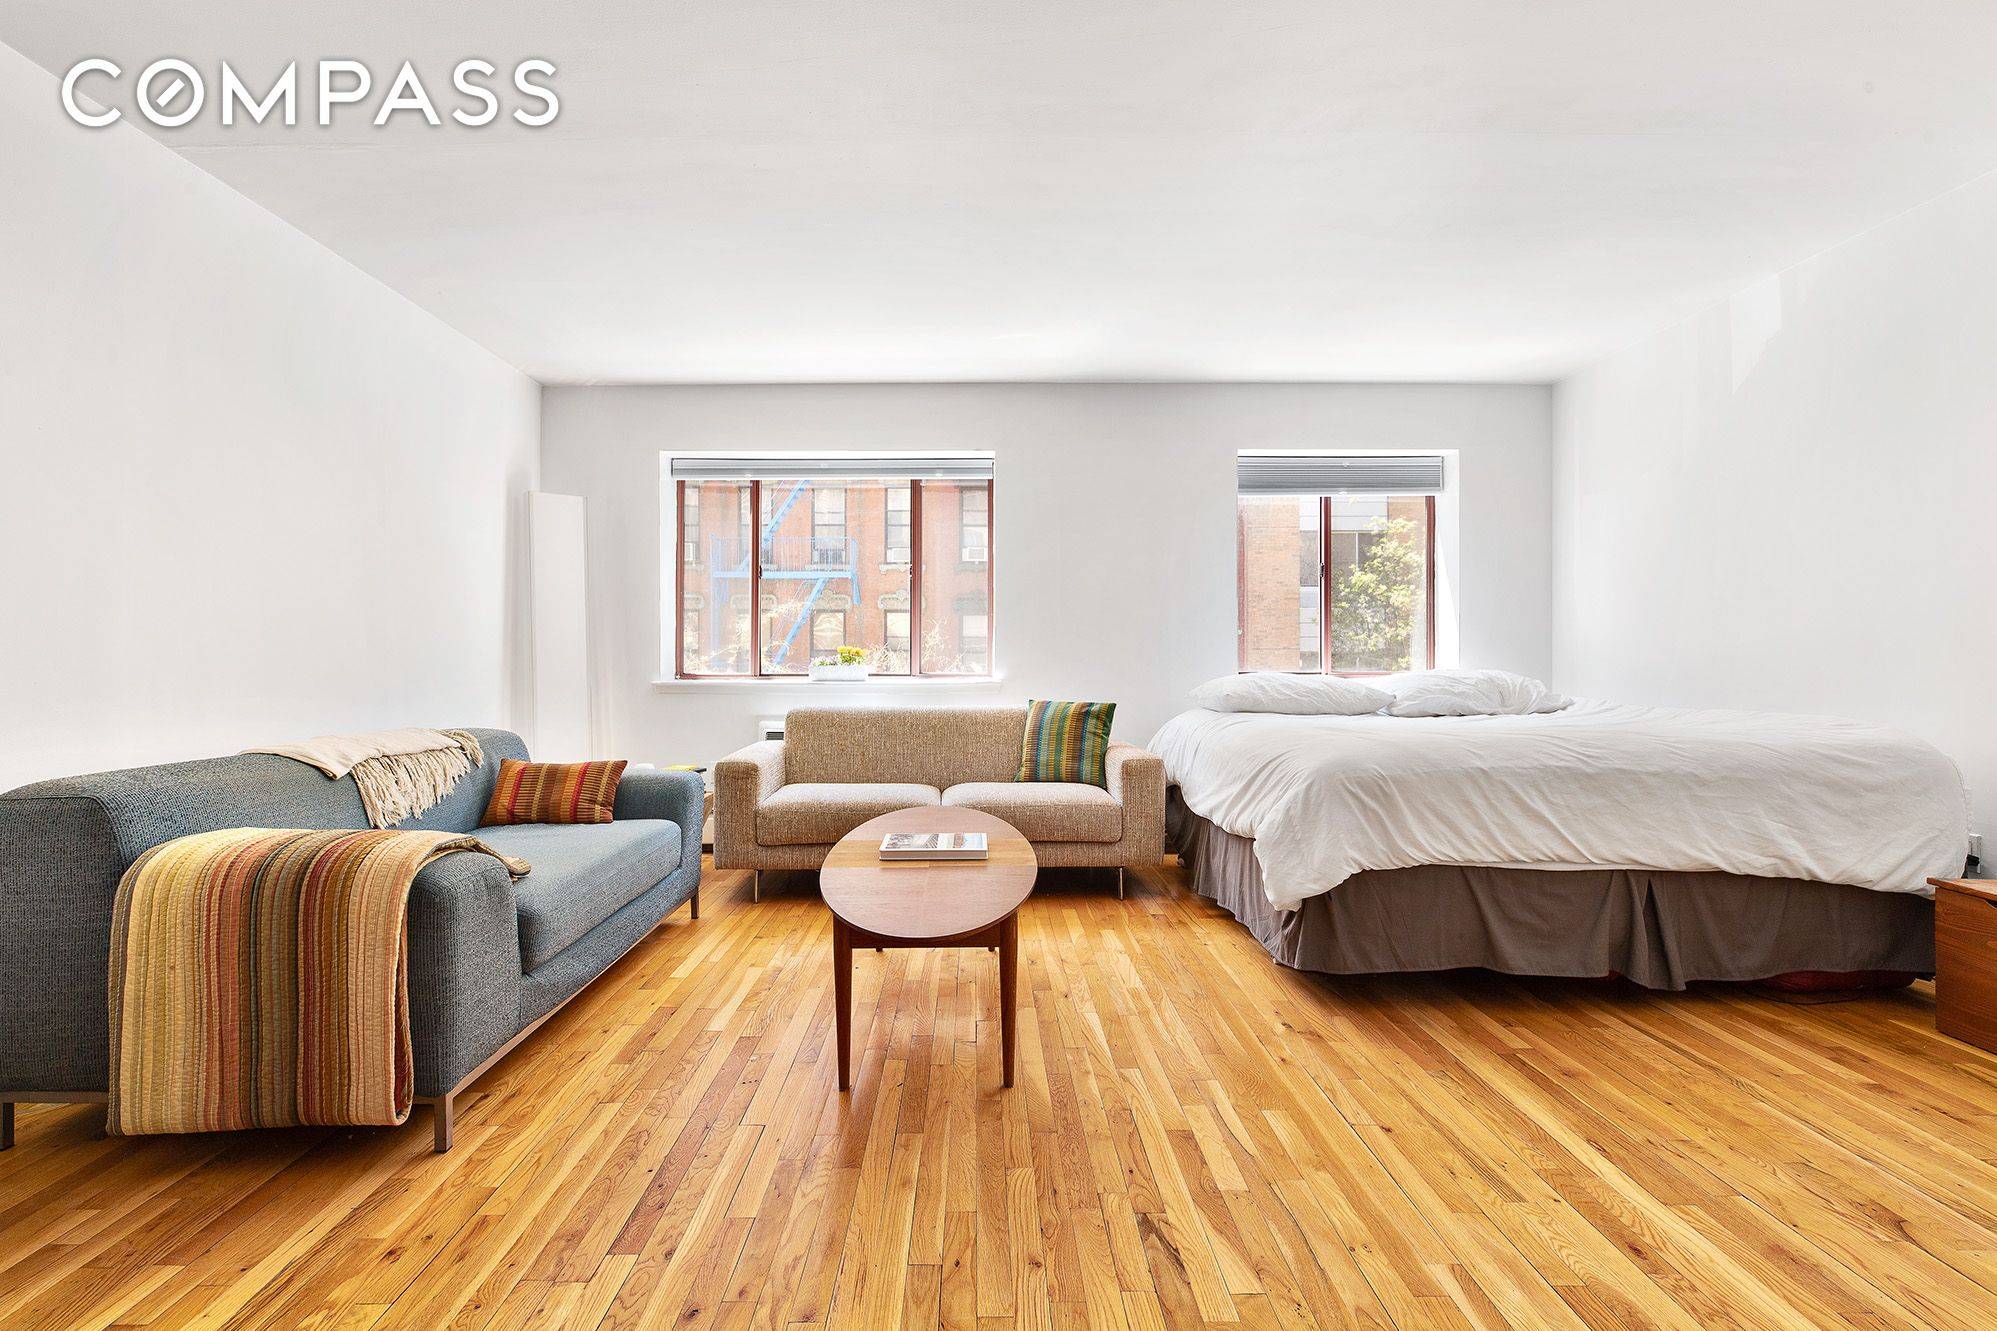 Located on one of the most picturesque blocks in the East Village 217 East 7th is one of the great low monthly boutique condos in lower Manhattan.